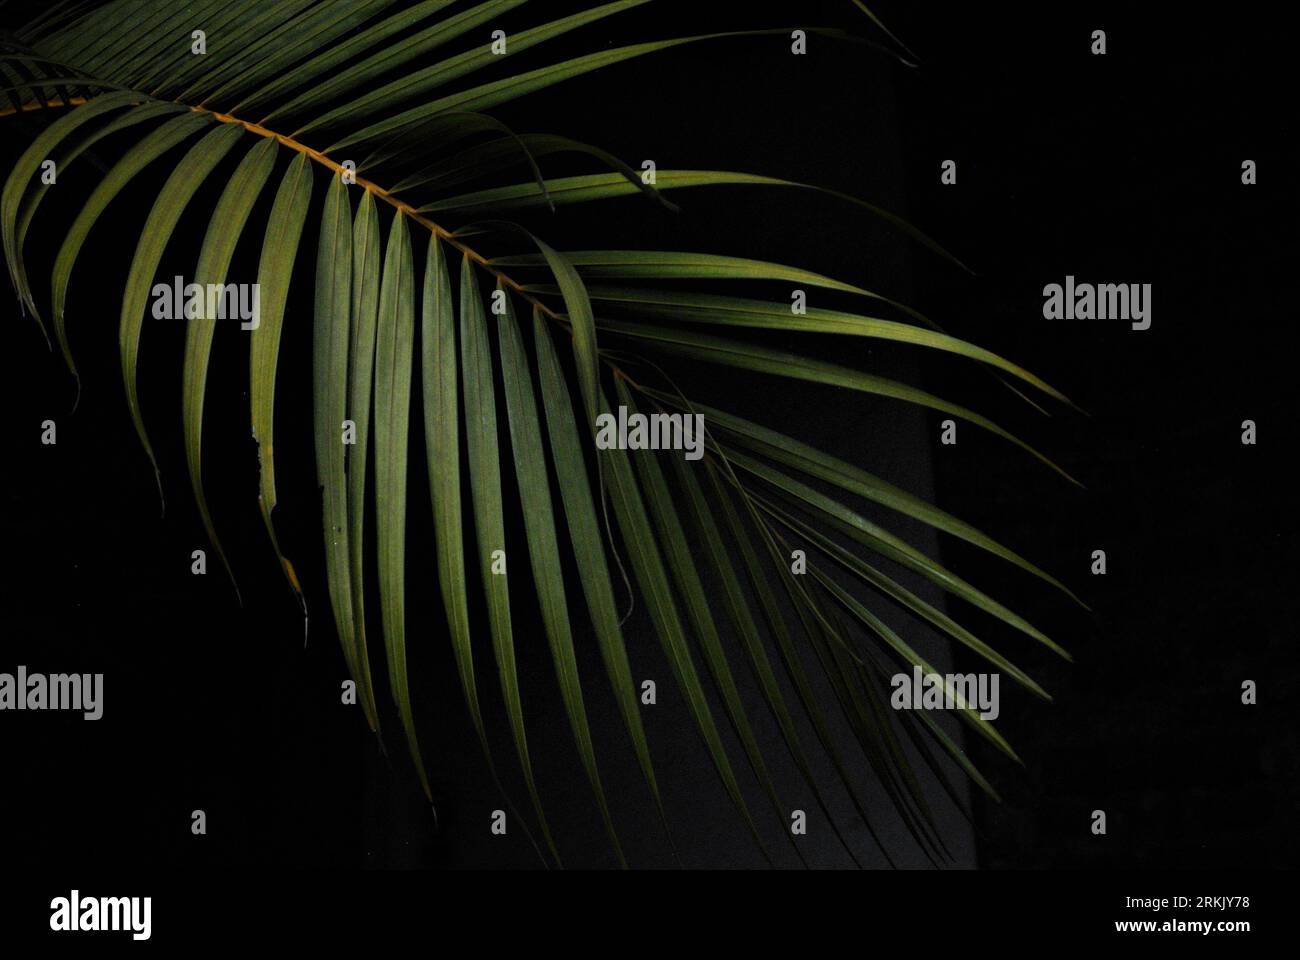 Image of a palm frond with a black background. Stock Photo